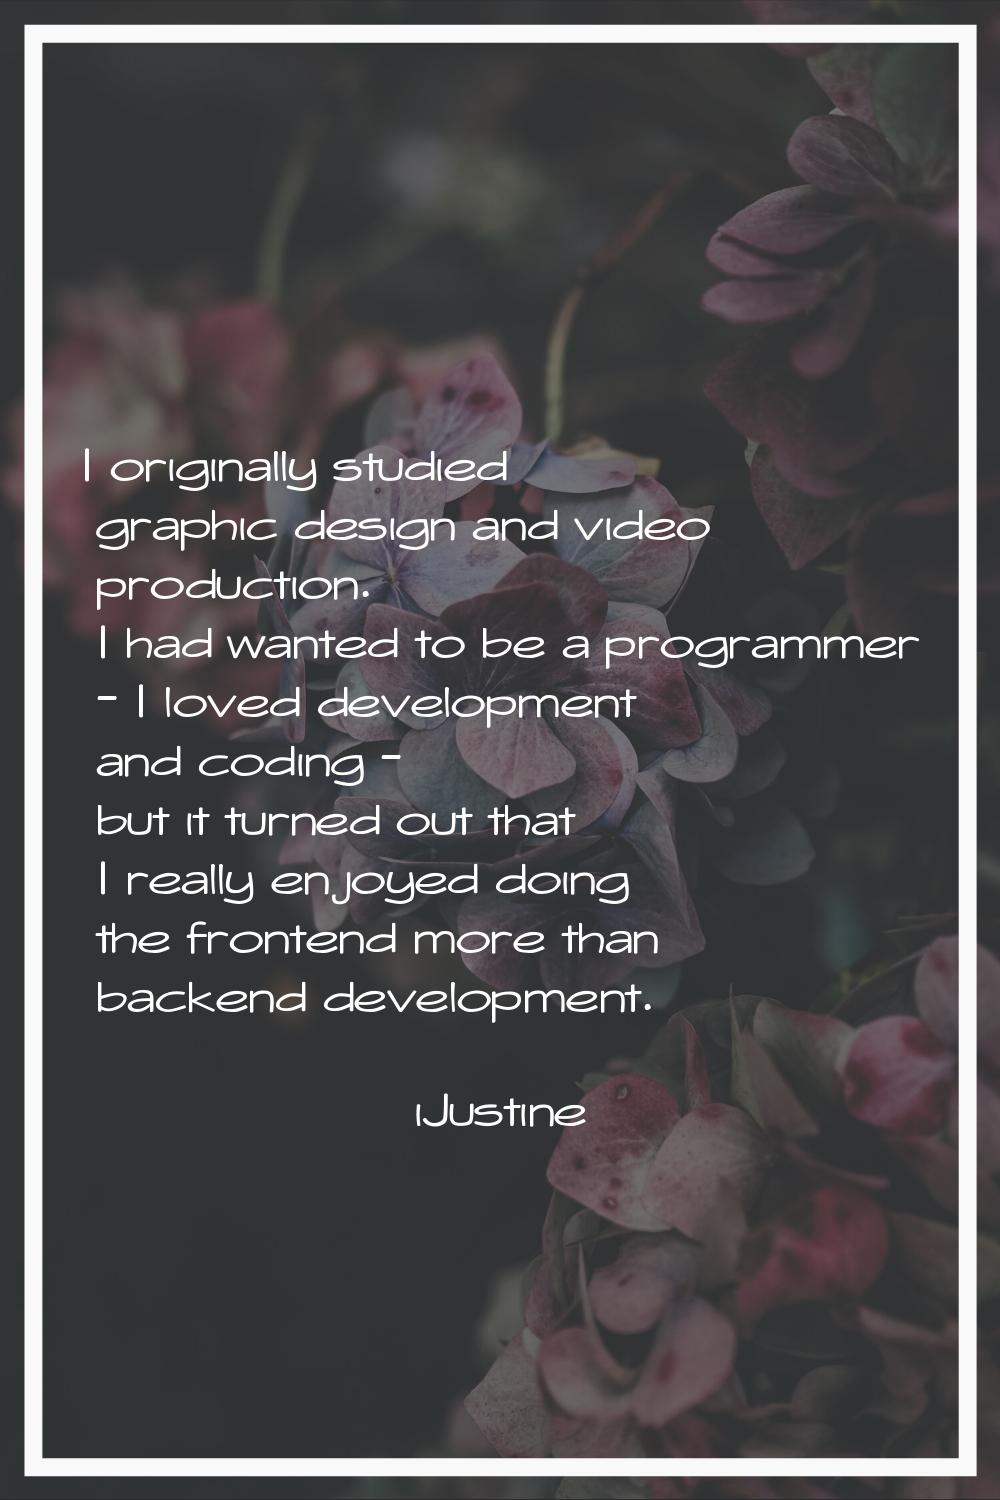 I originally studied graphic design and video production. I had wanted to be a programmer - I loved